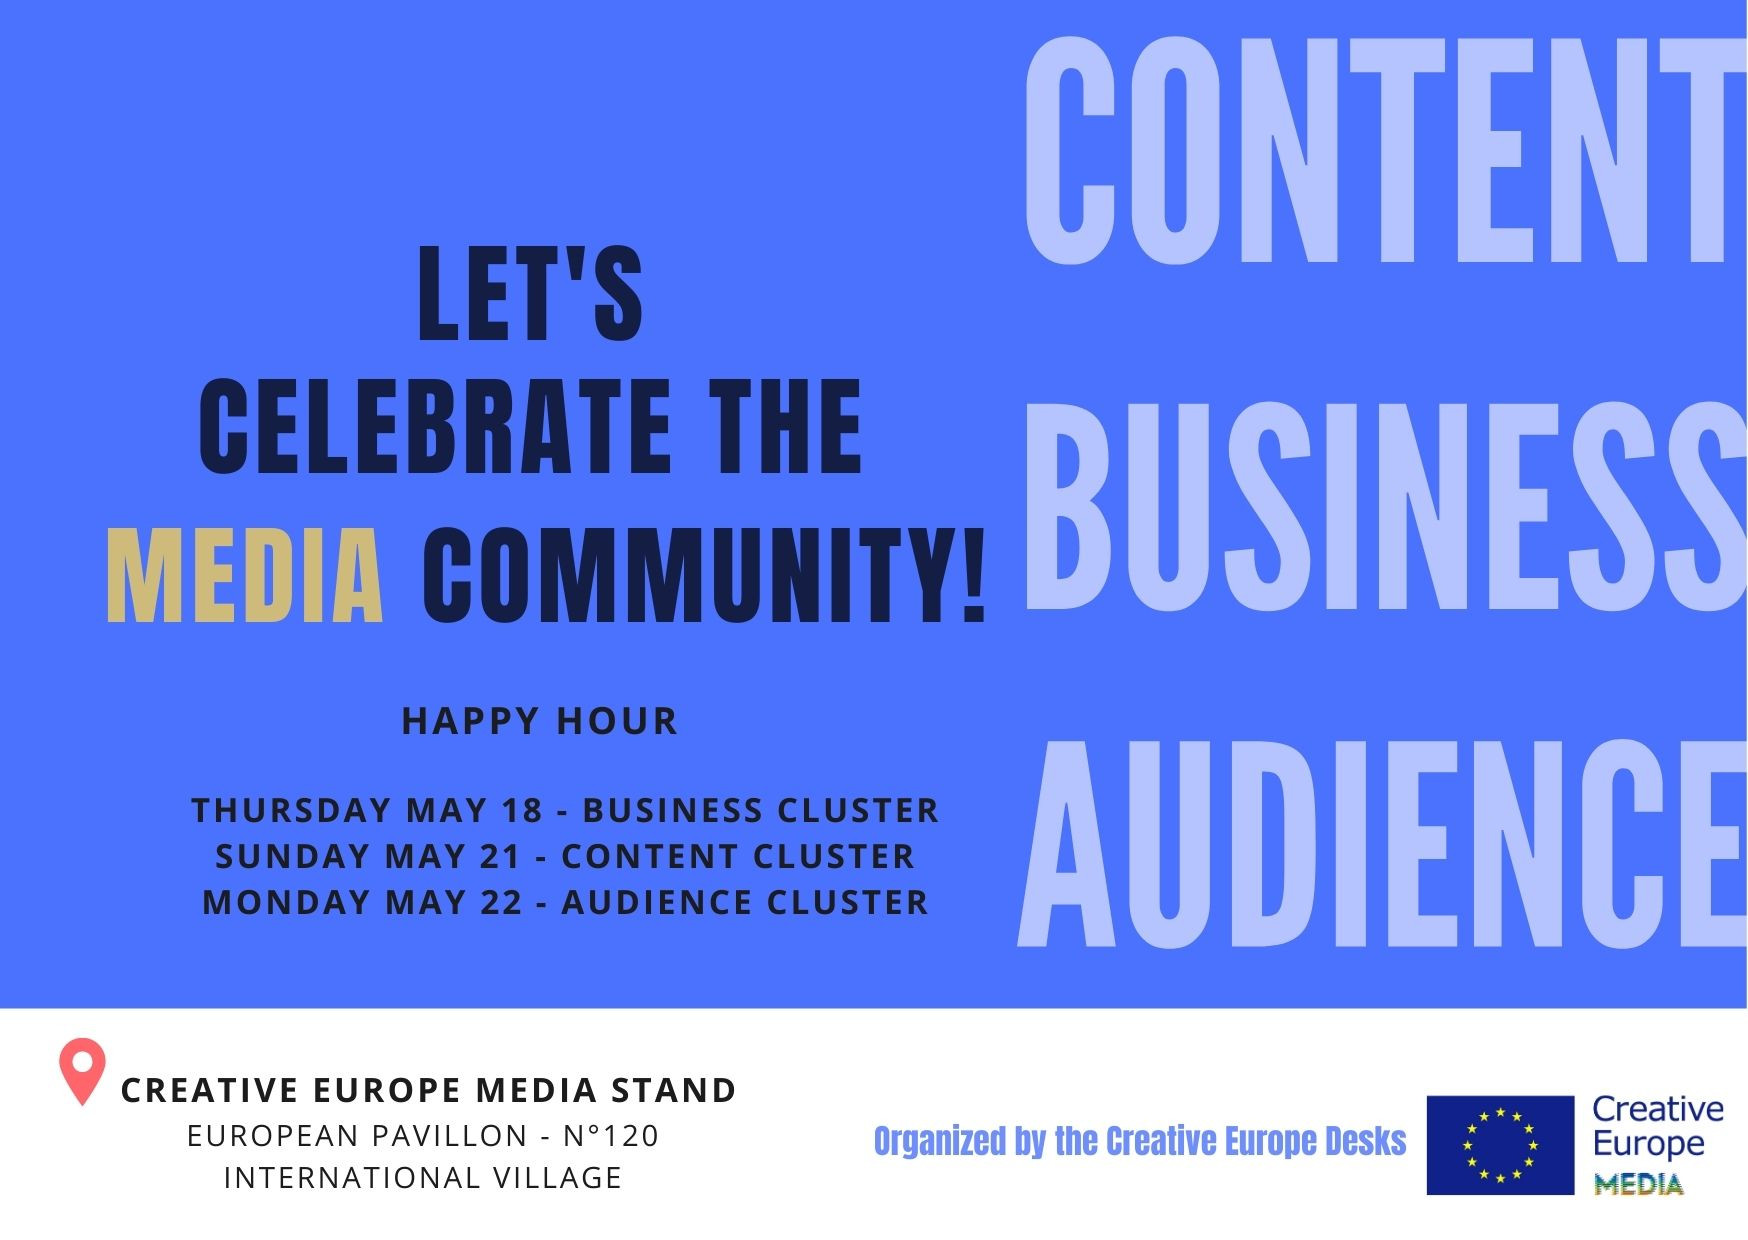 Let's celebrate the MEDIA community! Happy Hour. May 18th : Business cluster. May 21th : Content cluster. May 22th : Audience cluster. Creative Europe Stand.